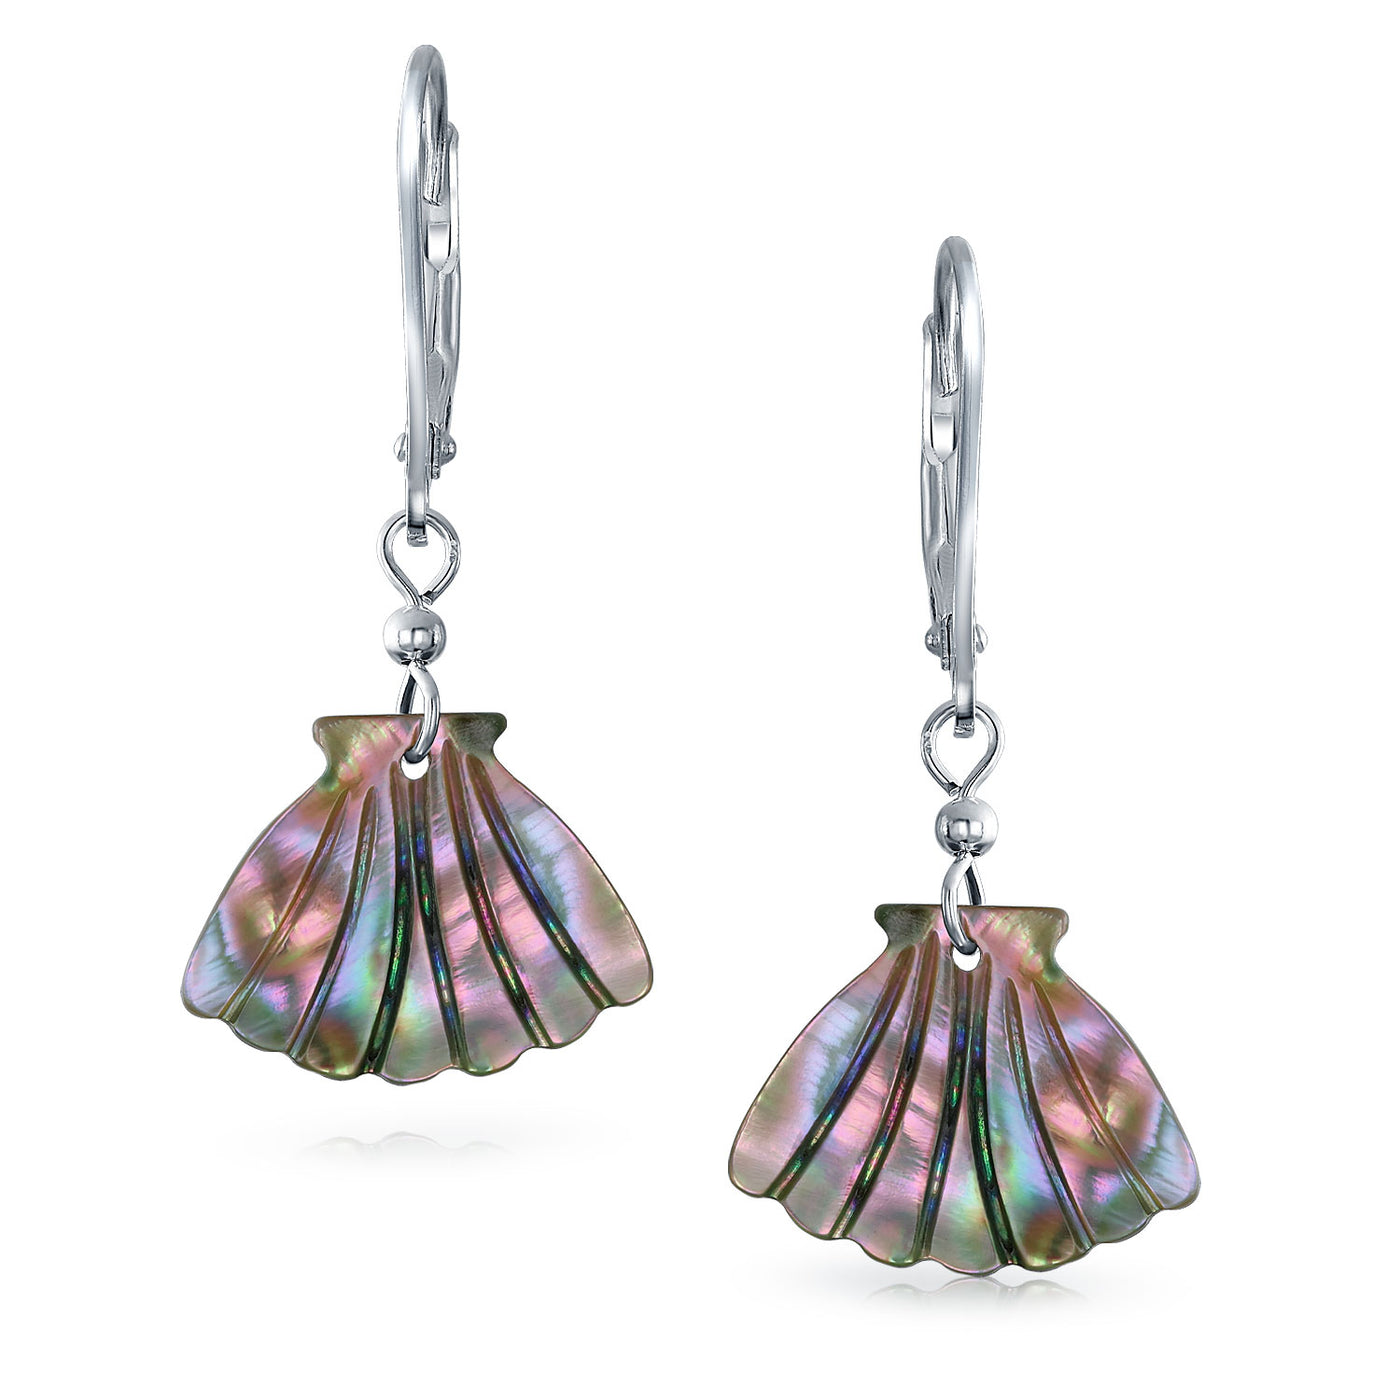 Carved Abalone Clam Dangle Lever back Earrings .925 Sterling Silver